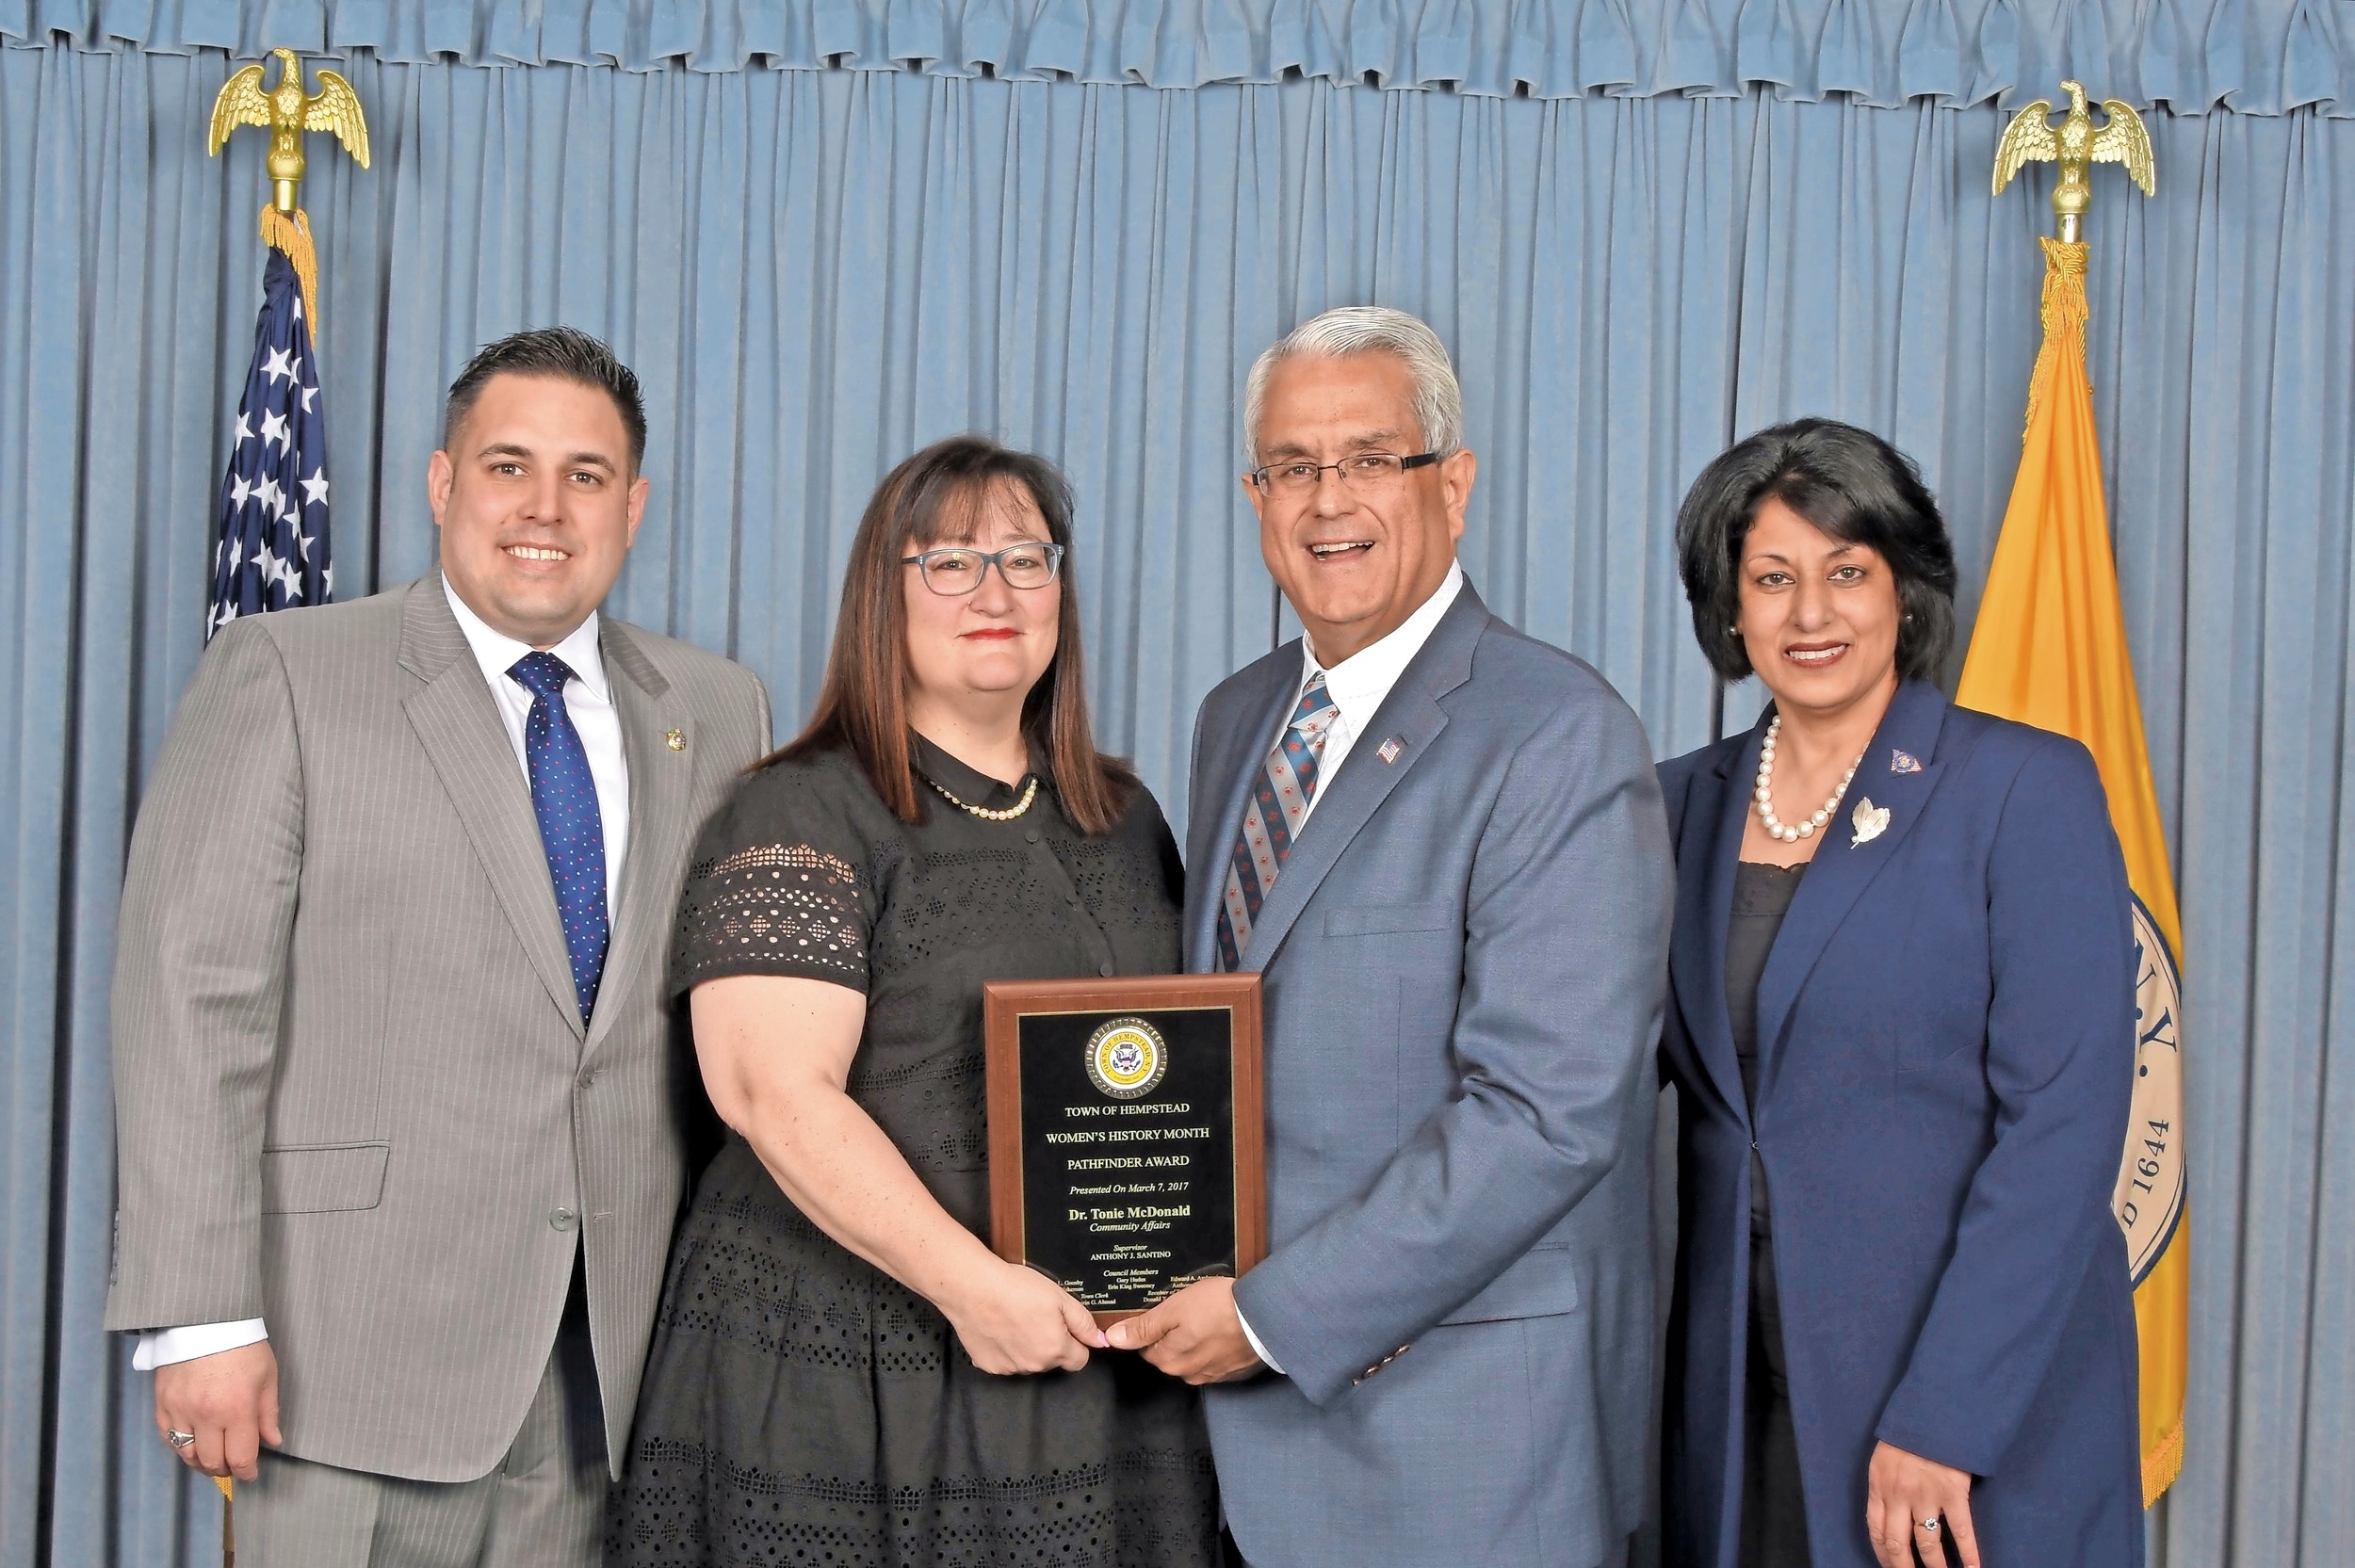 Dr. Tonie McDonald, center, the superintendent of the Levittown School District, won the Town of Hempstead Pathfinder Award. Councilman Anthony D’Esposito, left, Supervisor Anthony Santino and Town Clerk Nasrin Ahmad commended McDonald for her commitment to the community.